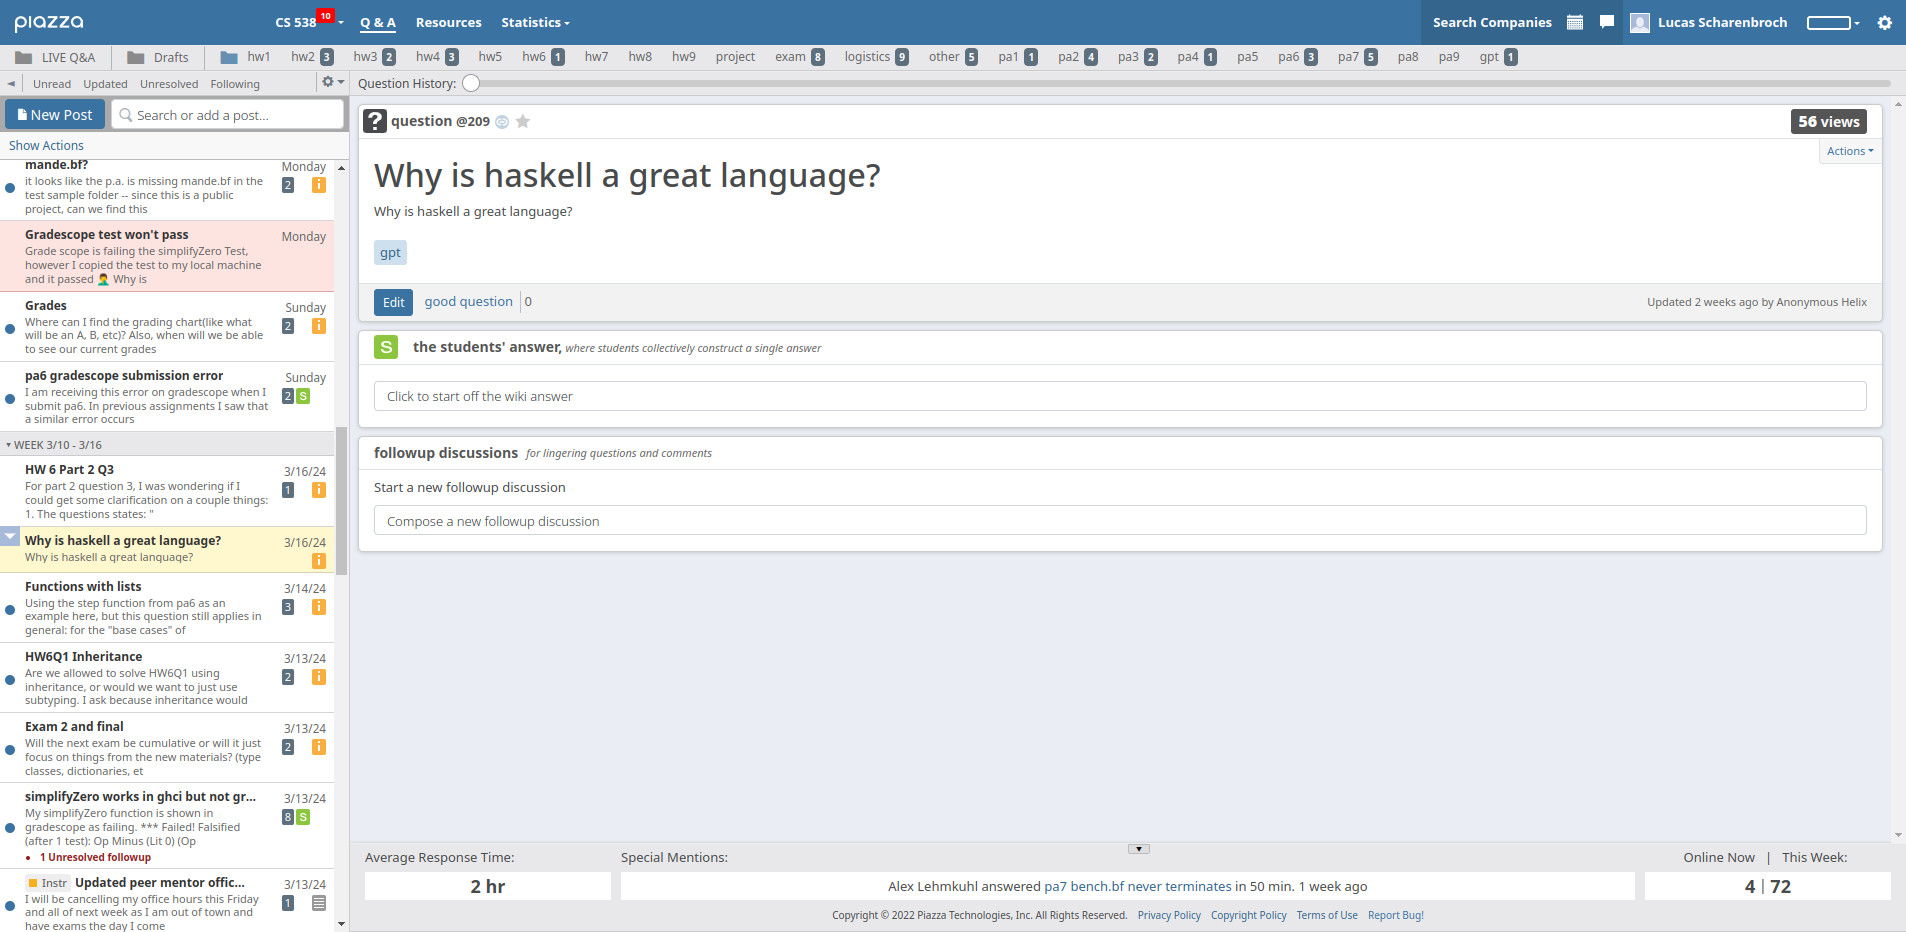 Piazza question: 'Why is Haskell a great language?'